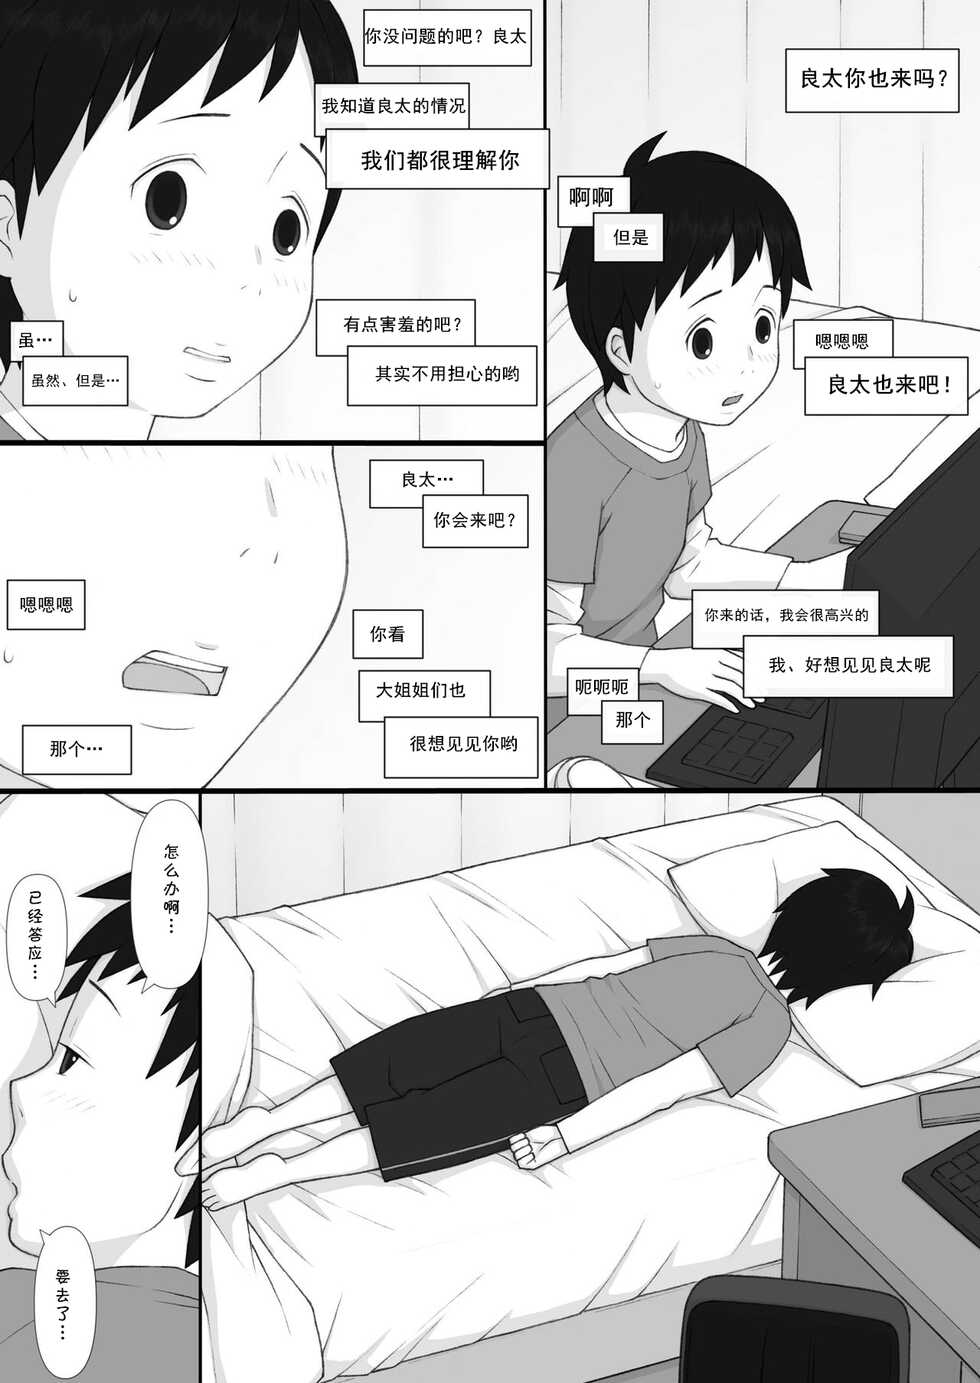 [Ponpharse] Ponpharse - The Non-Fiction [Chinese] [cqxl自己汉化] - Page 10